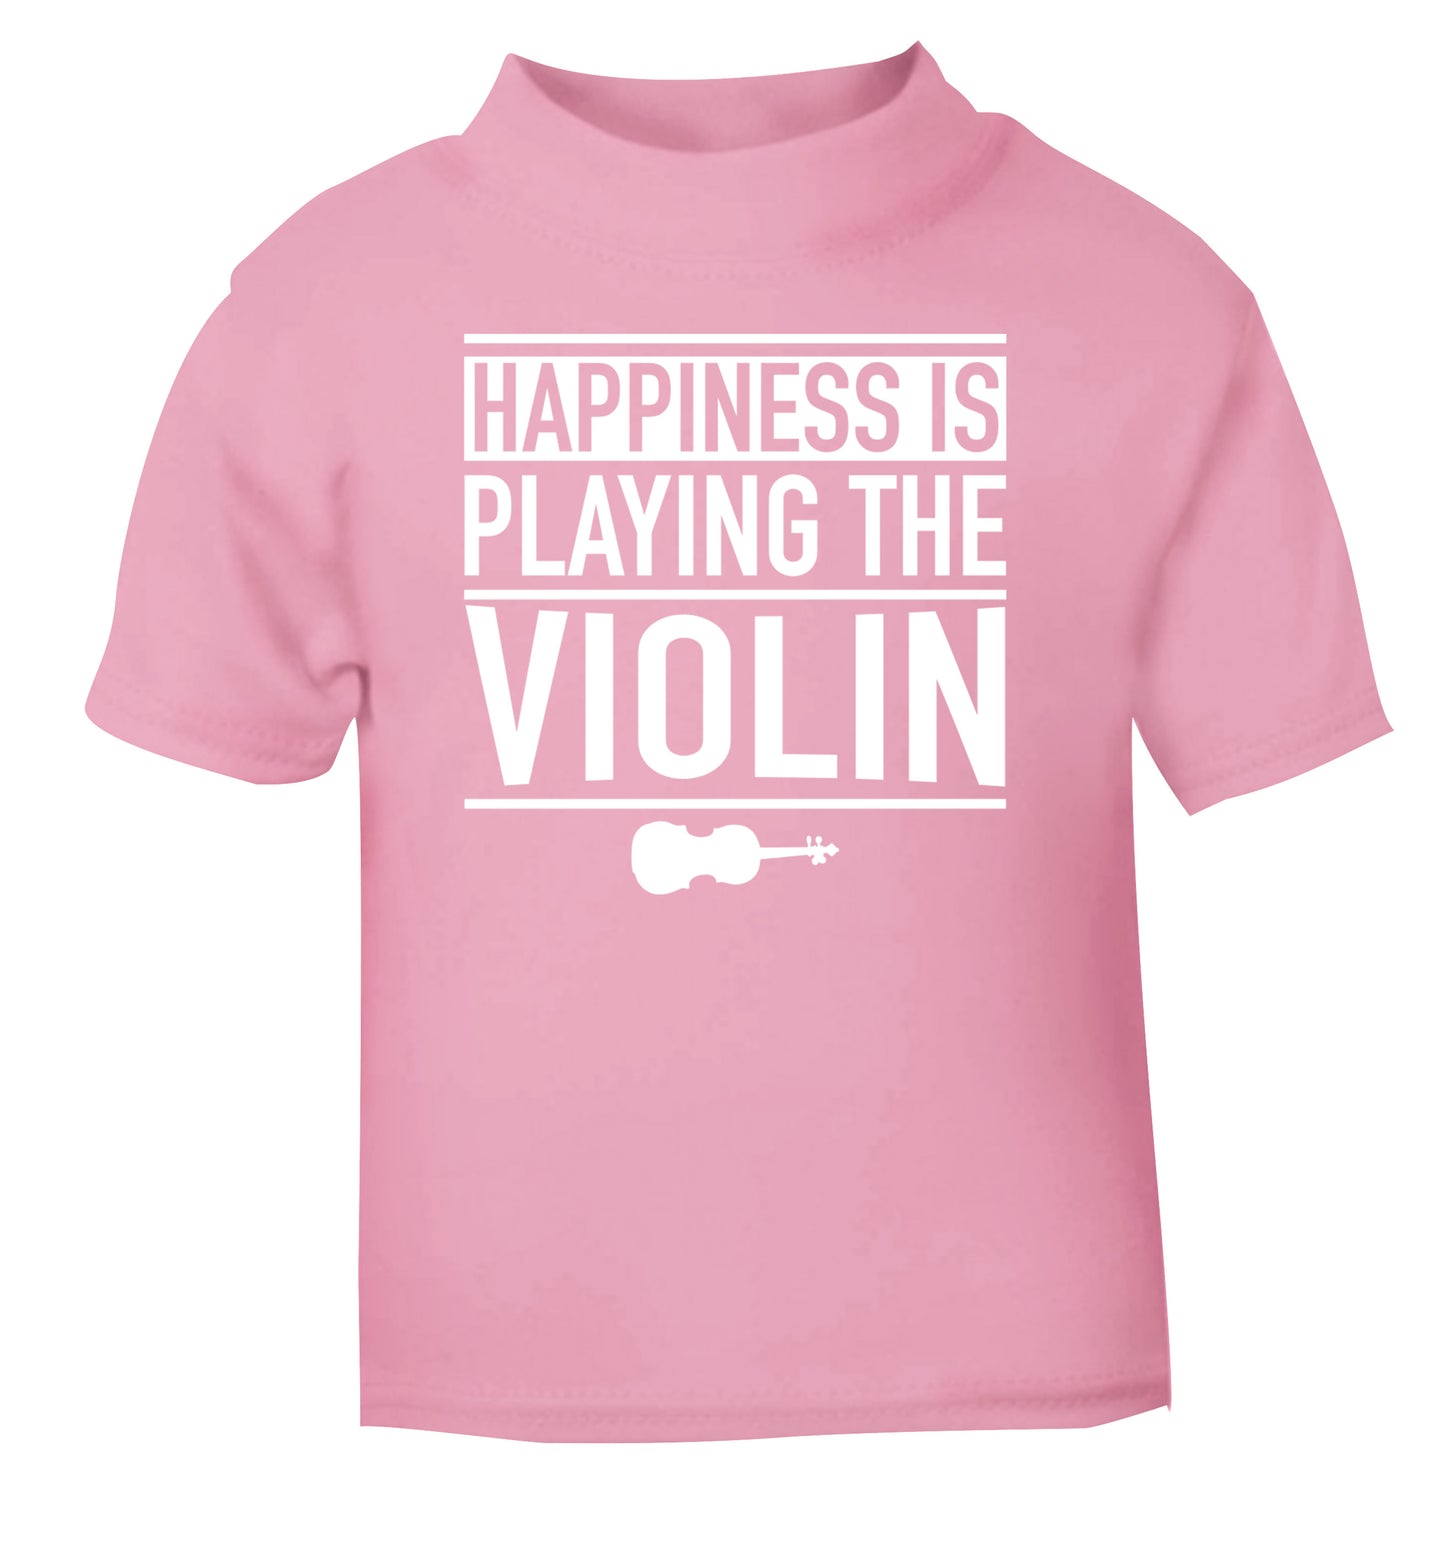 Happiness is playing the violin light pink Baby Toddler Tshirt 2 Years